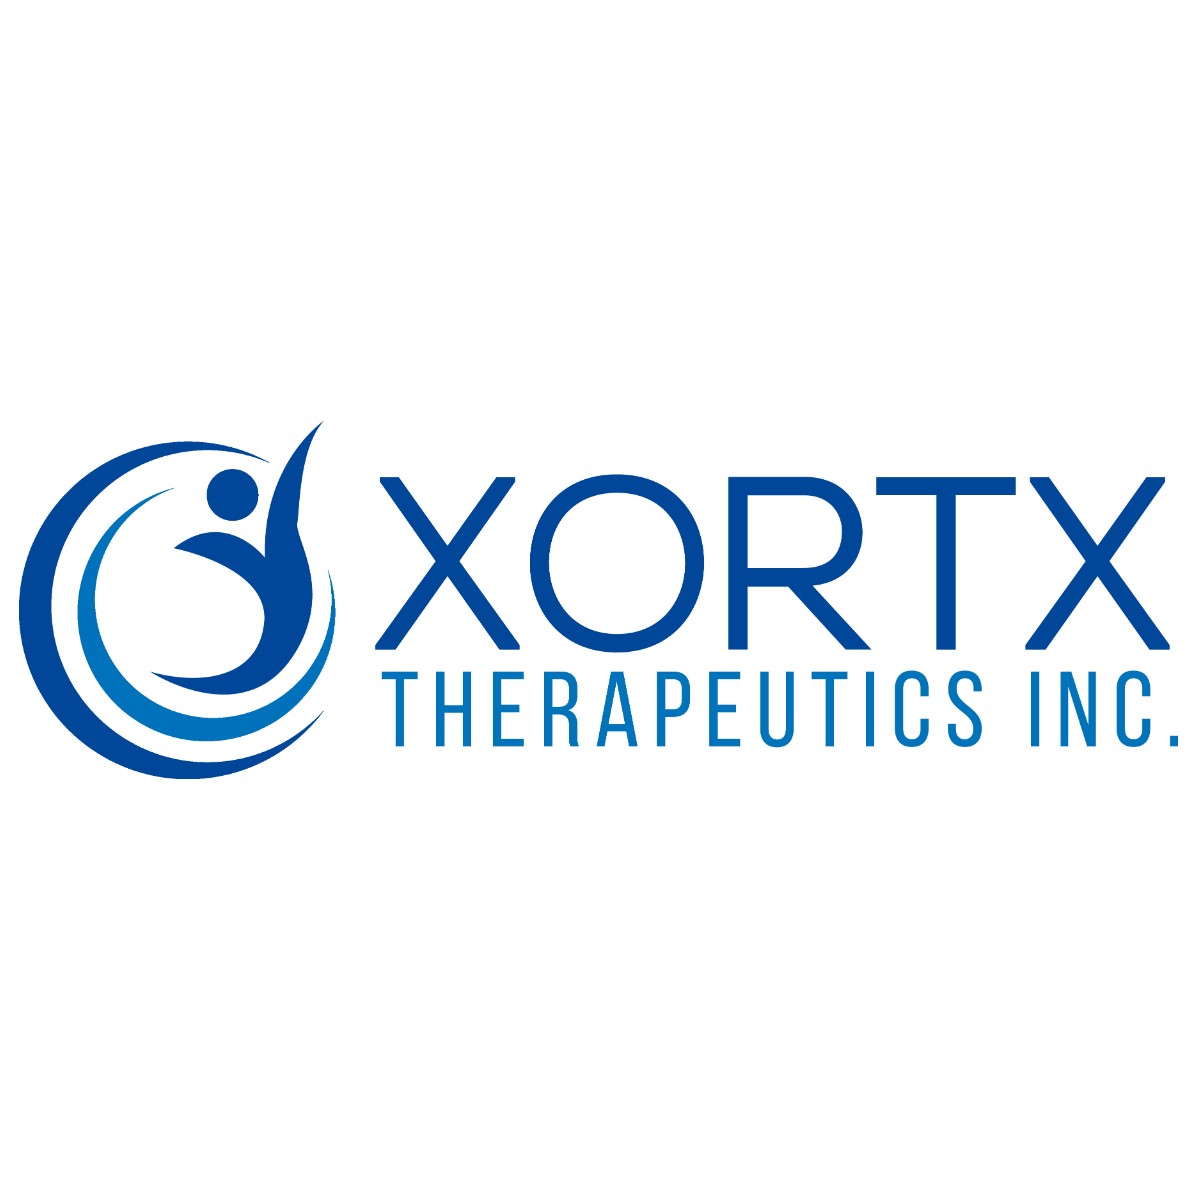 XORTX Presents New Proof of Concept Data at American Society of Nephrology